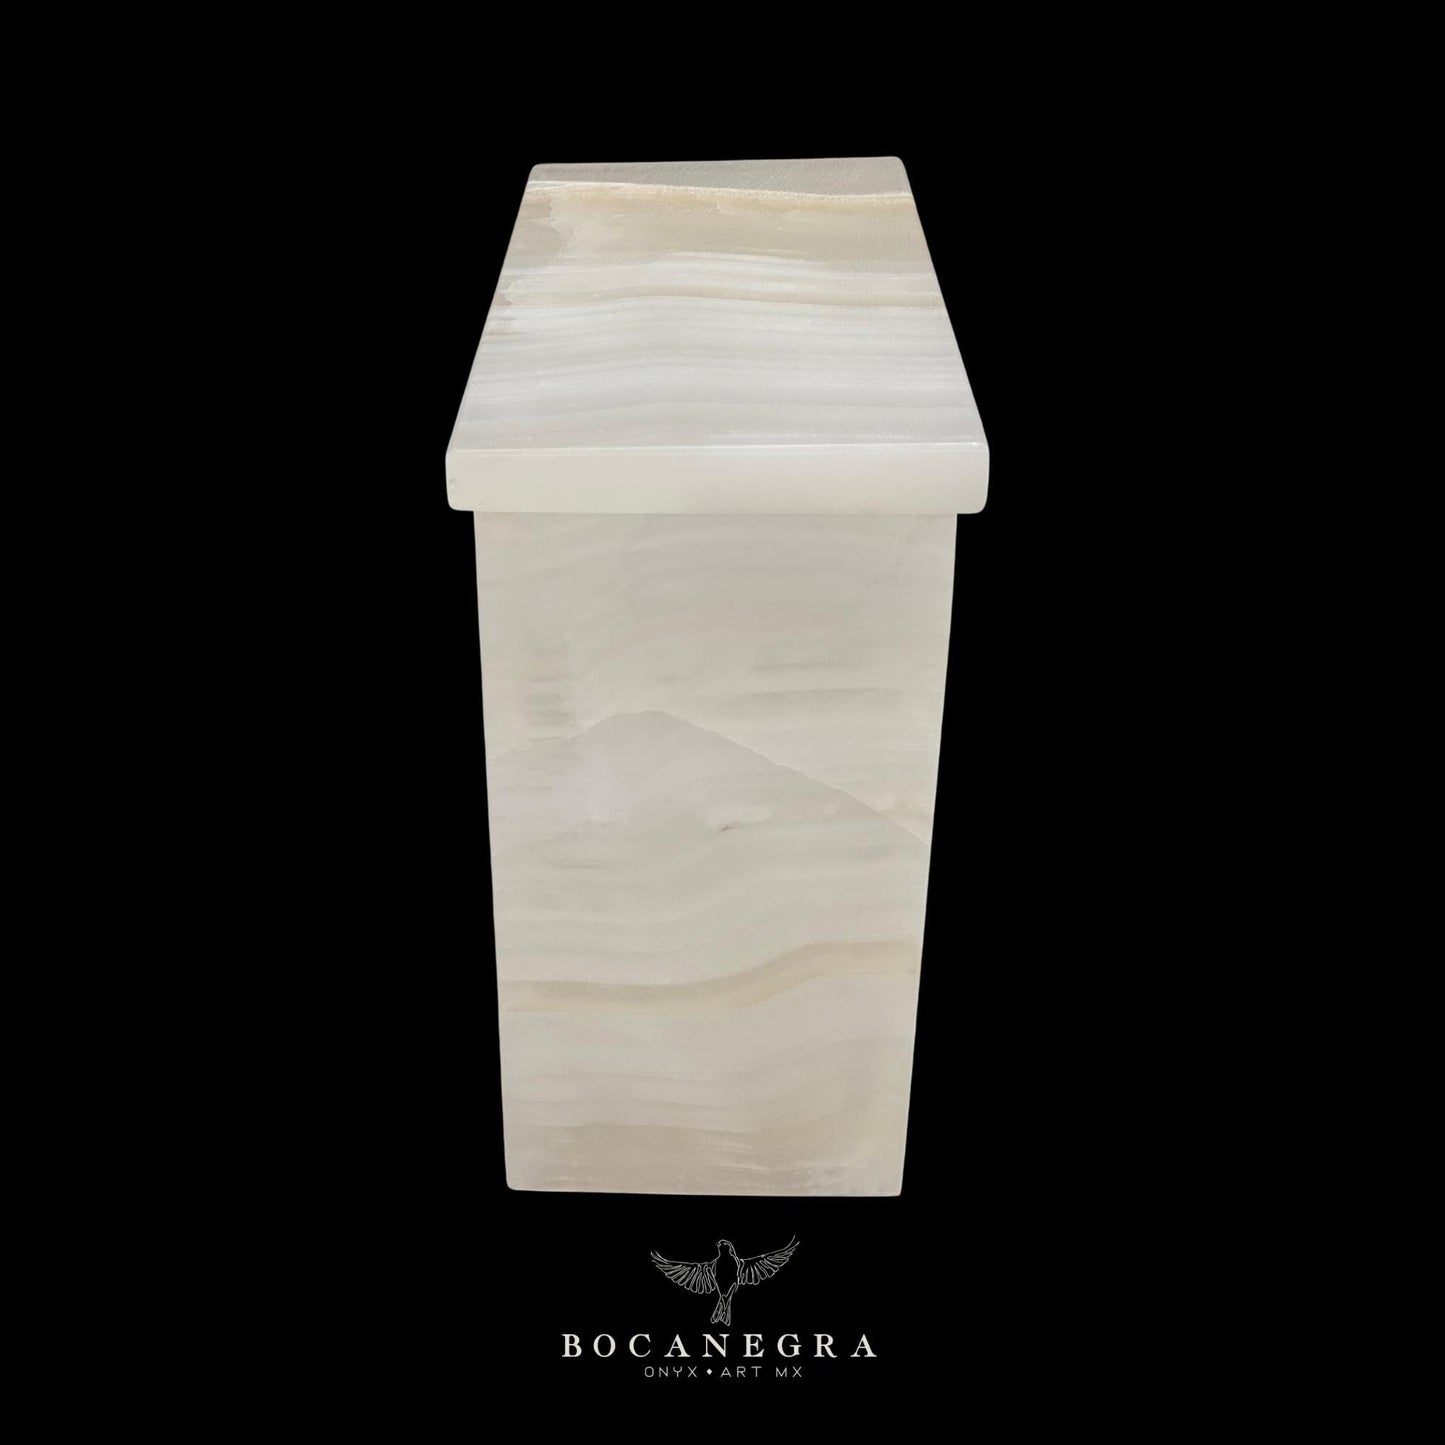 White Onyx Cremation Urn for Human or pet Ashes